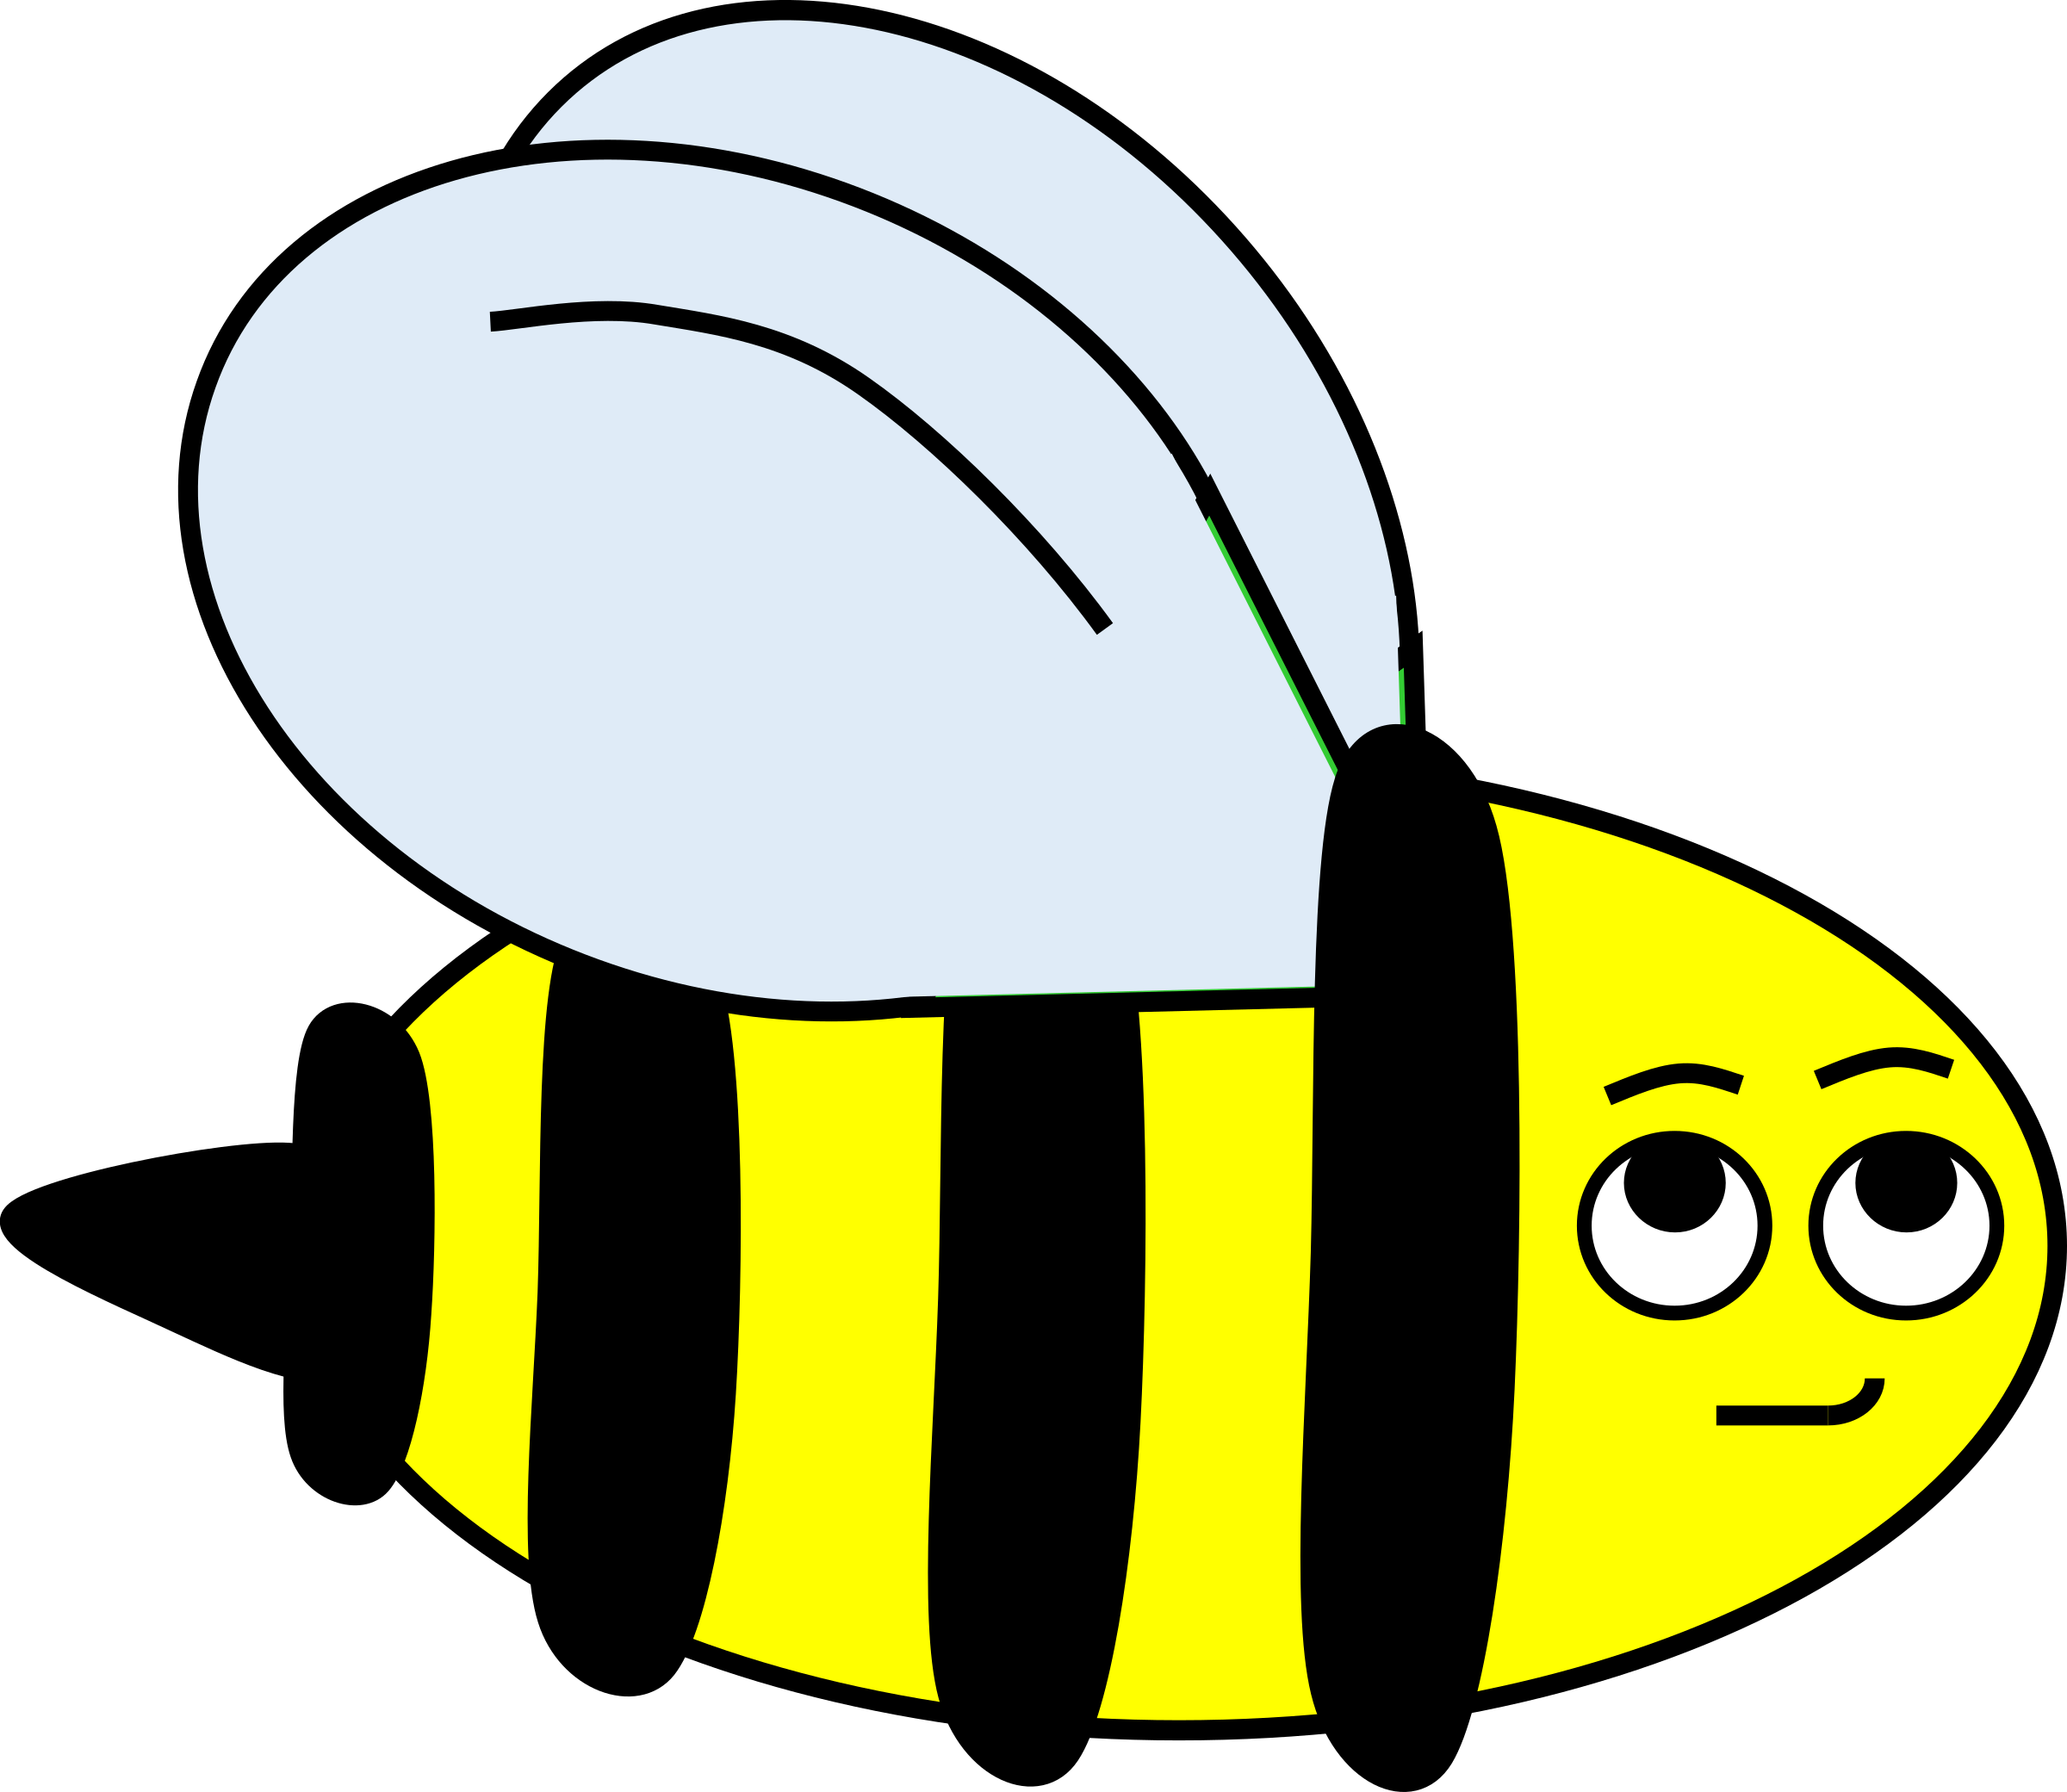 love clipart bumble bee